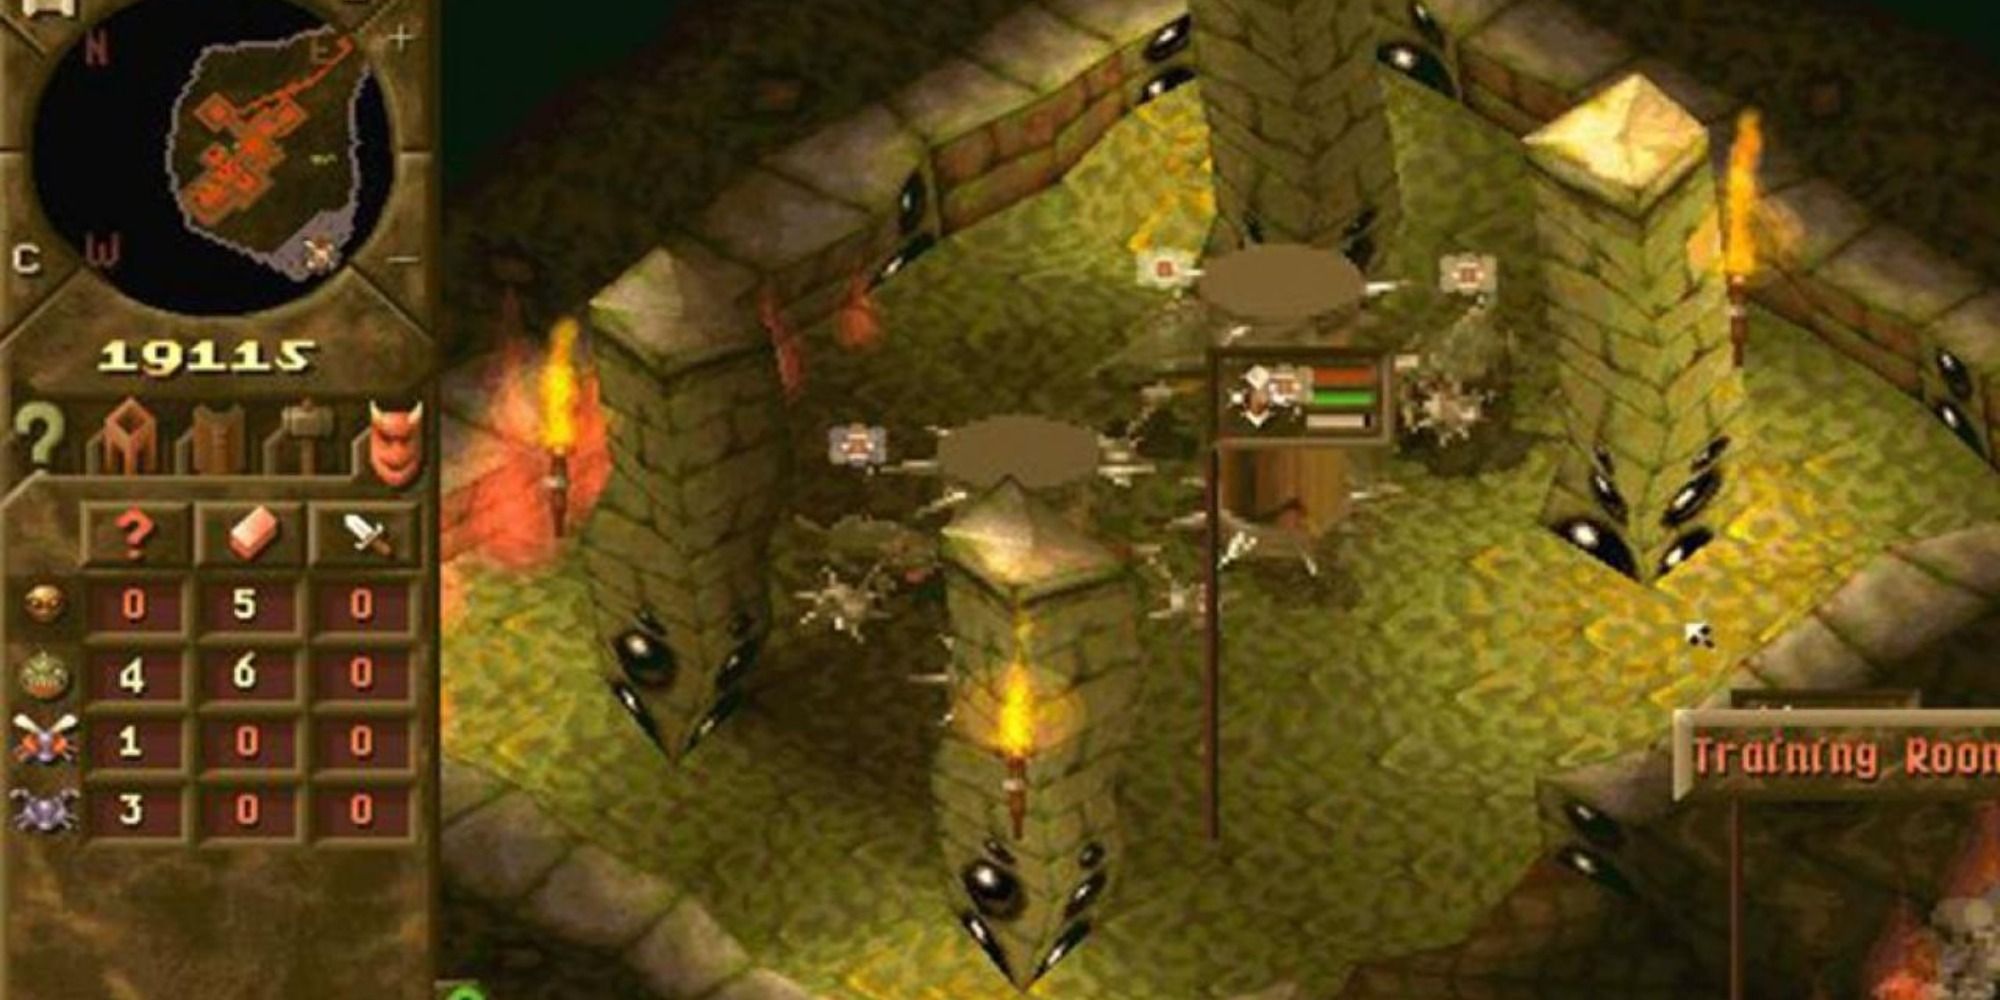 A training room in Dungeon Keeper